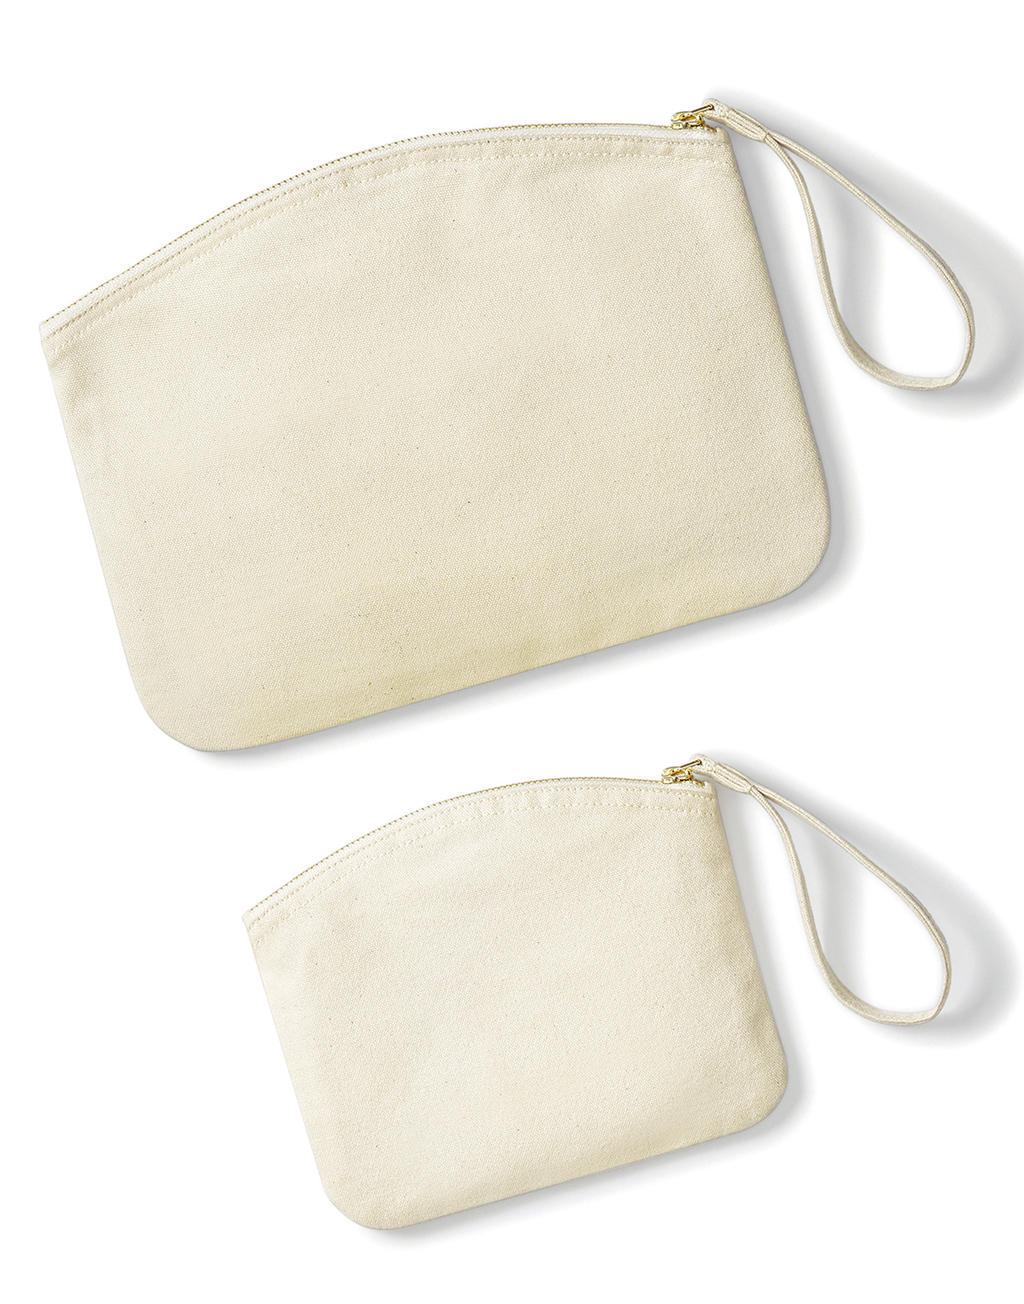  EarthAware? Organic Spring Wristlet in Farbe Natural